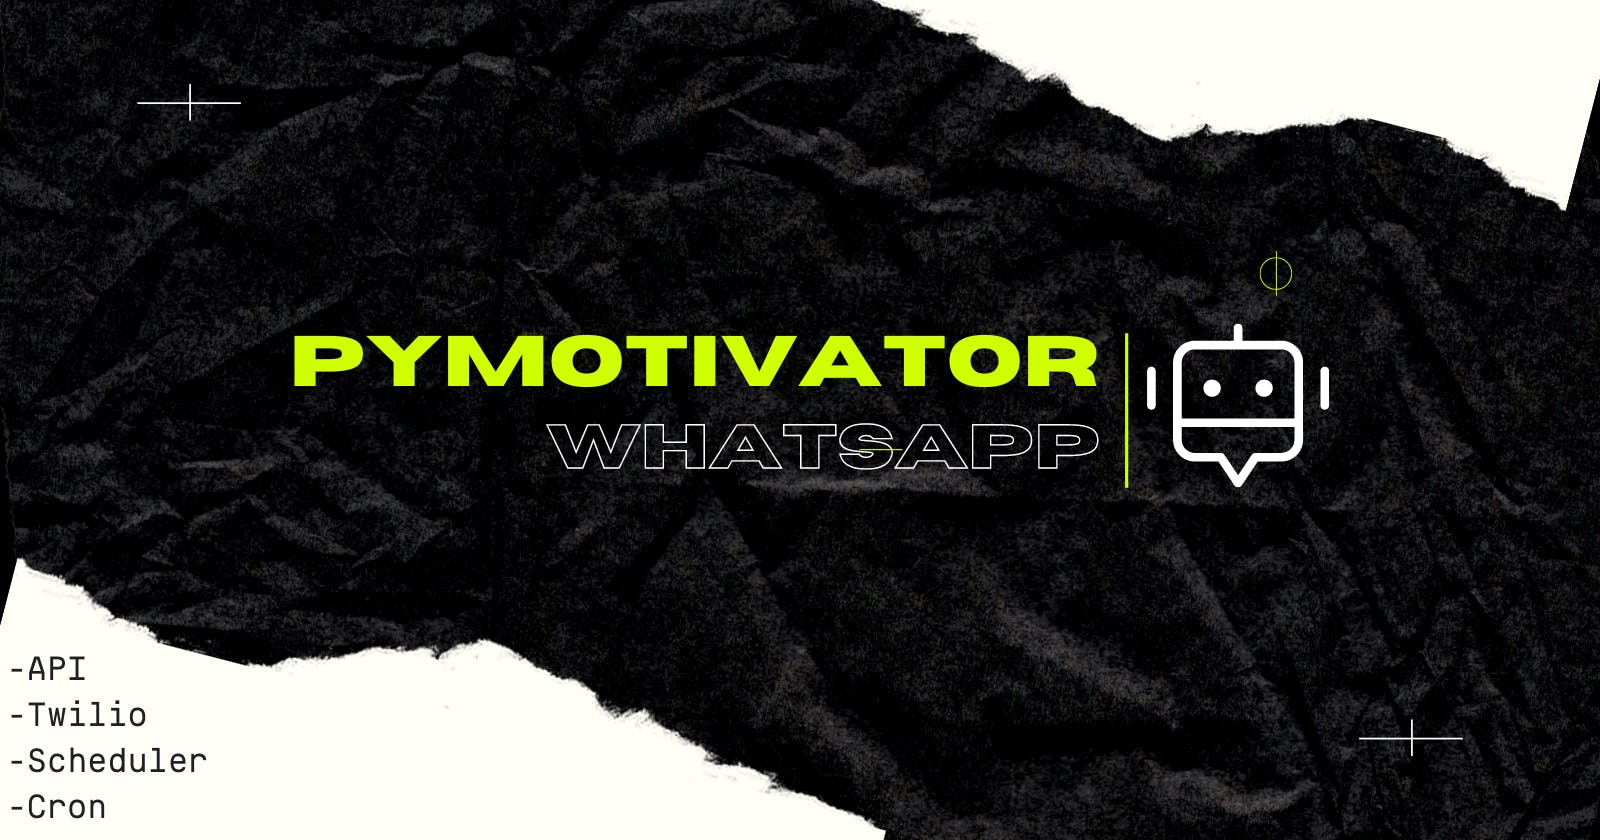 PyMotivator: Elevate Your Day with Python-Powered Motivational WhatsApp Quotes